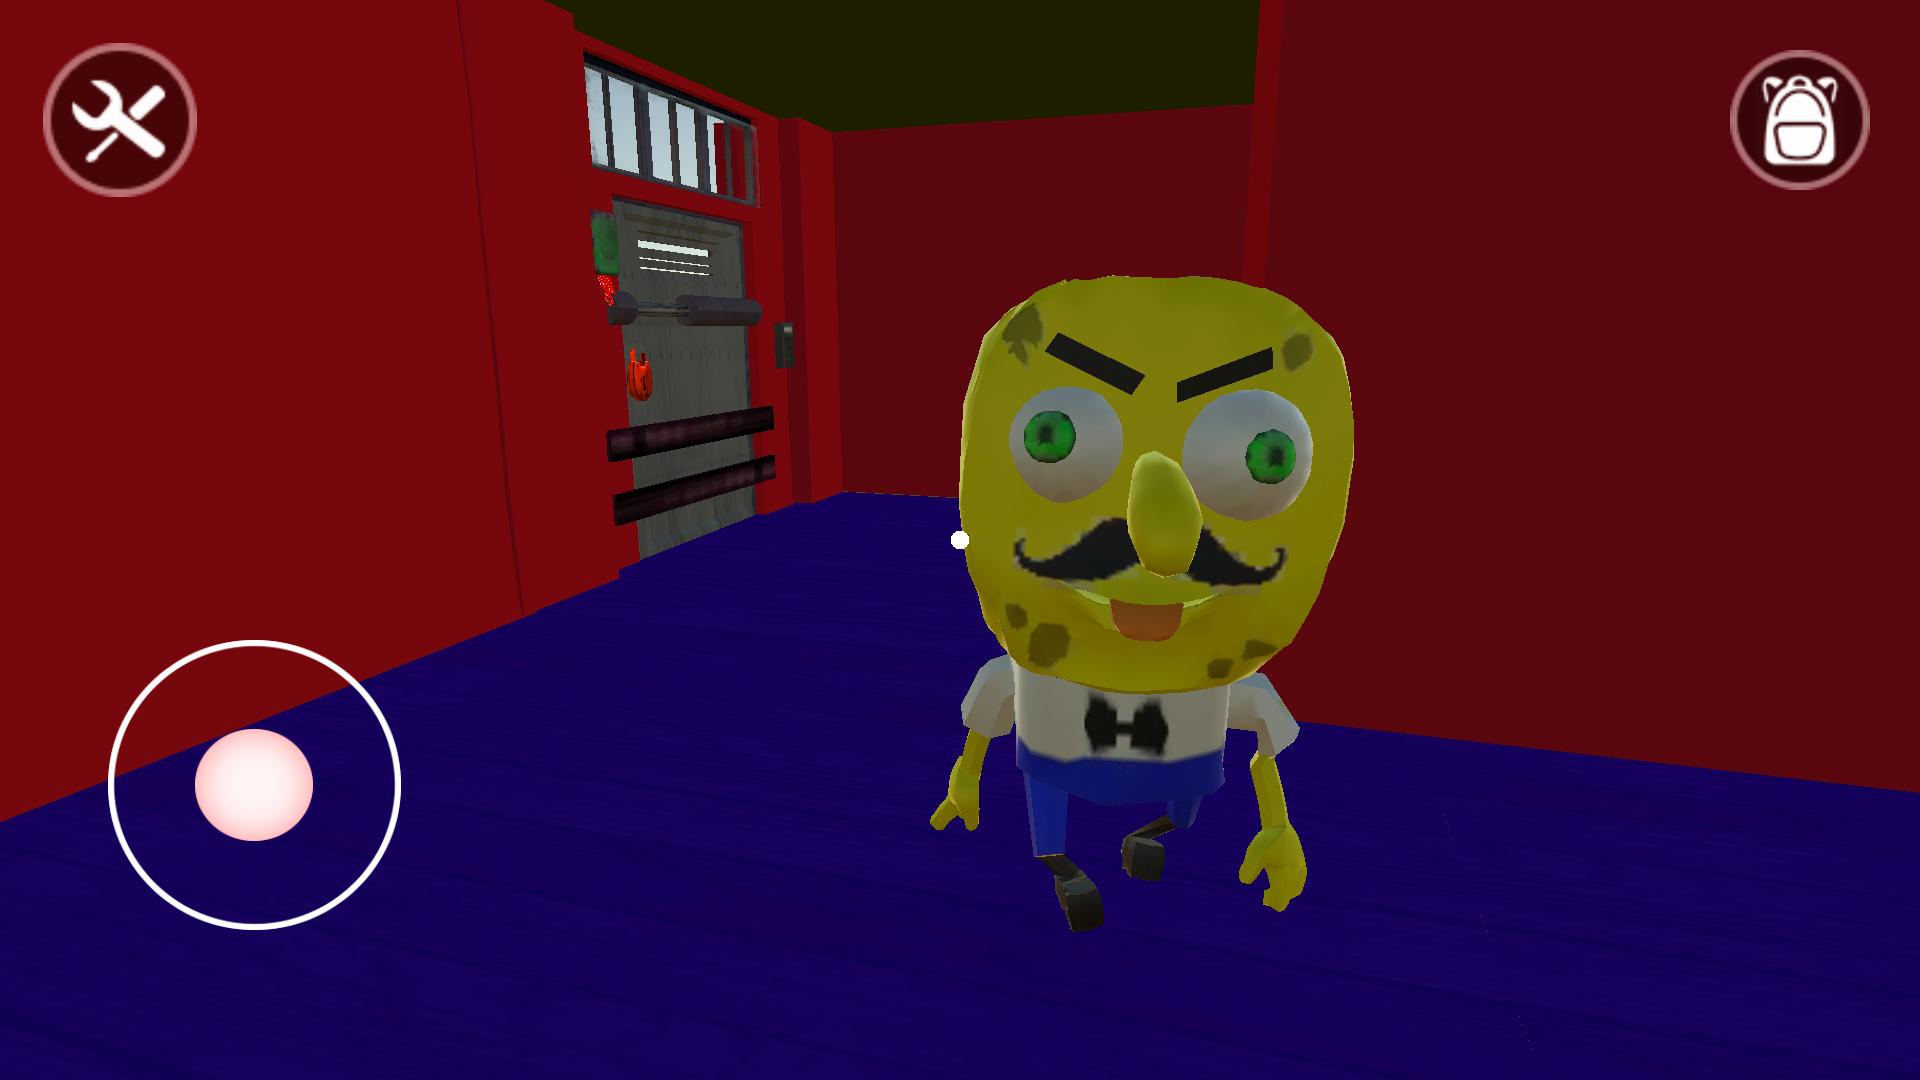 Escape Horror Elevator Robox S Scary Sponge For Android Apk Download - roblox scary elevator key